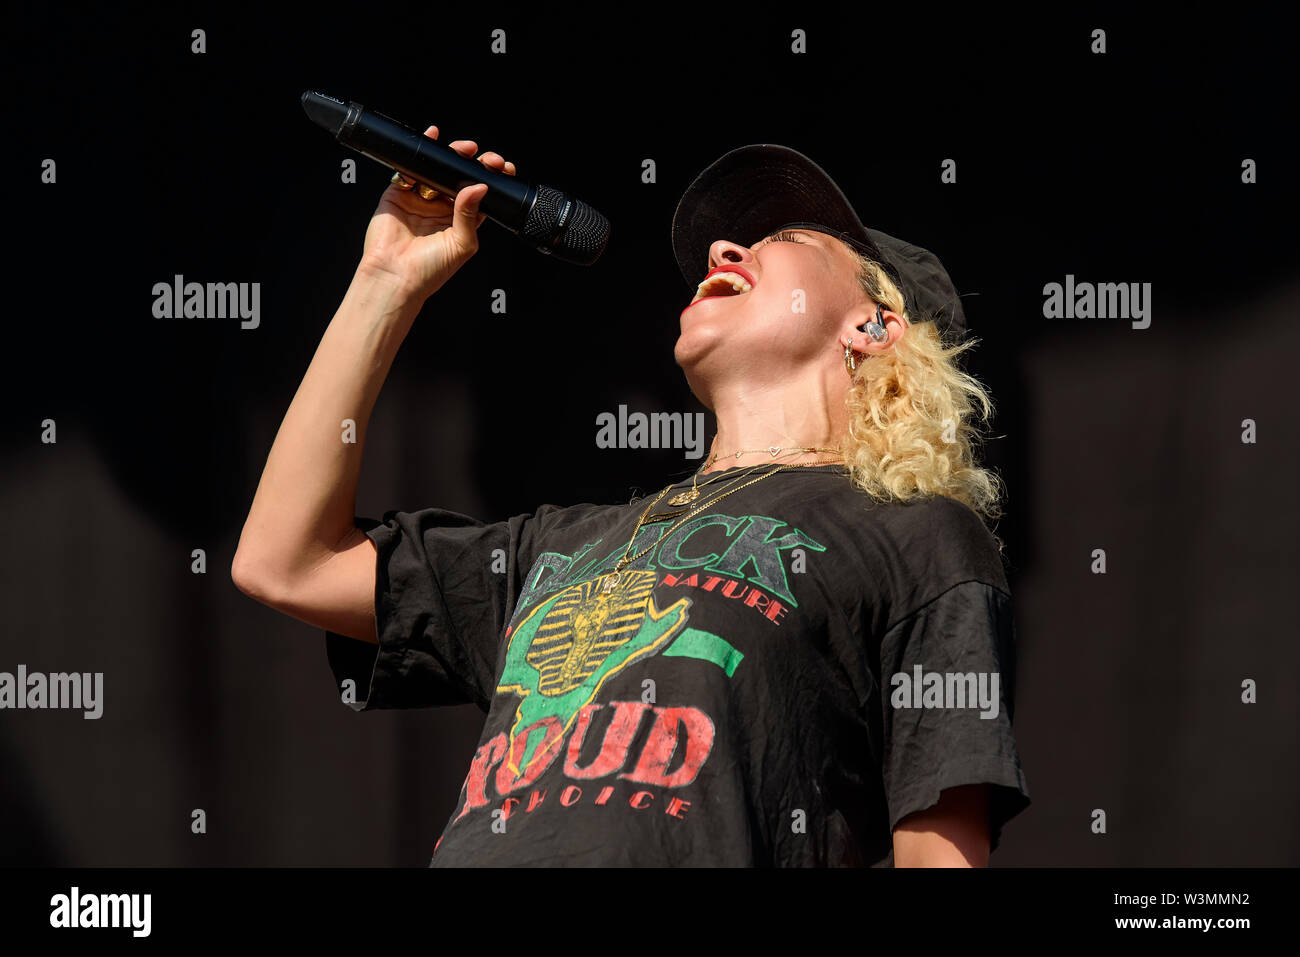 MADRID - JUN 30: Brass Against (band) perform in concert at Download (heavy metal music festival) on June 30, 2019 in Madrid, Spain. Stock Photo